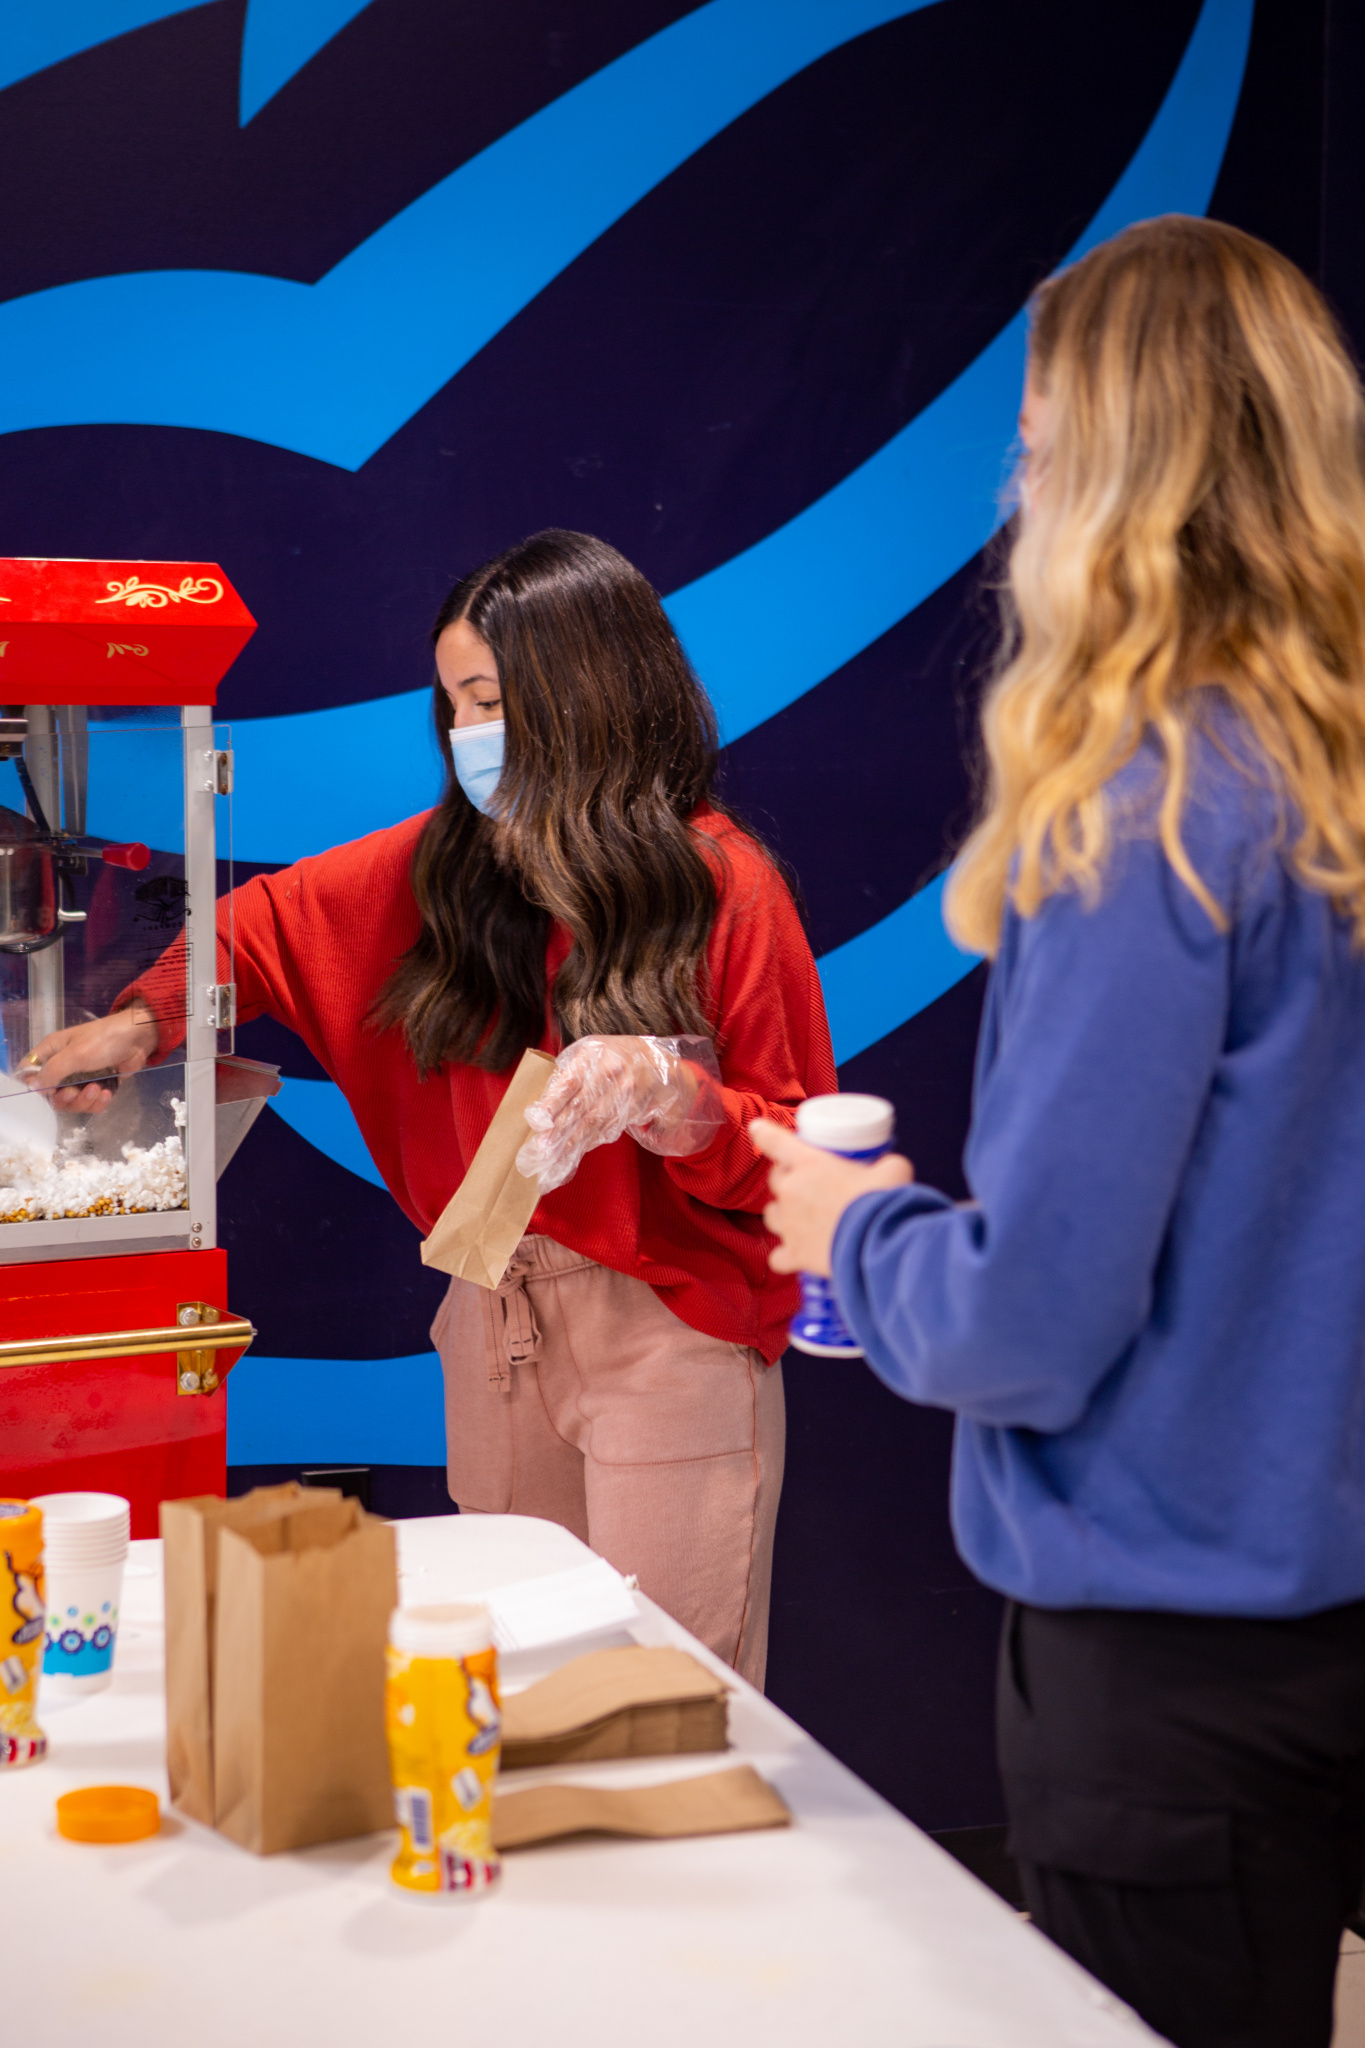 The Student Leadership Council served popcorn and donuts at Monday night's showing of Monsters University (Photo by Taylor Caldwell)